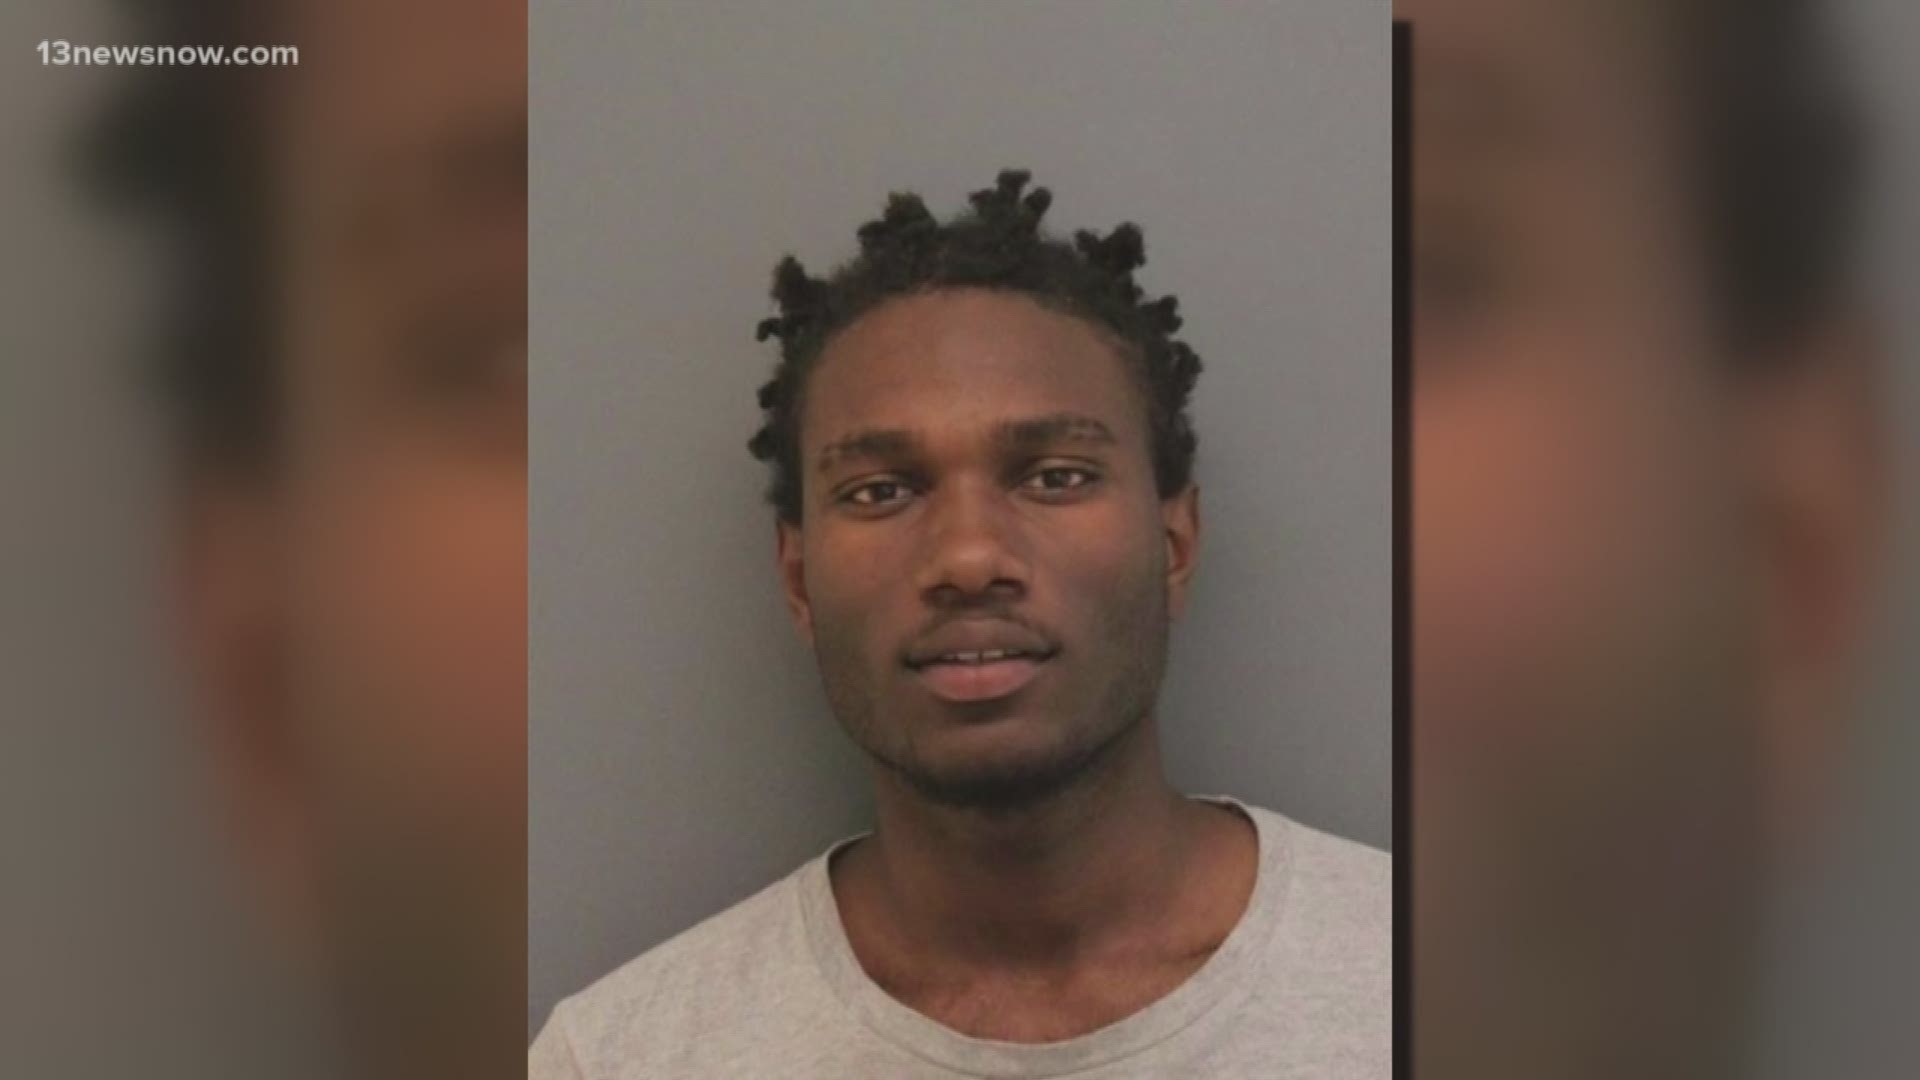 Newport News police are investigating a string of burglaries. De'vante Johnson, 19, and a 17-year-old were arrested for two of those burglaries.